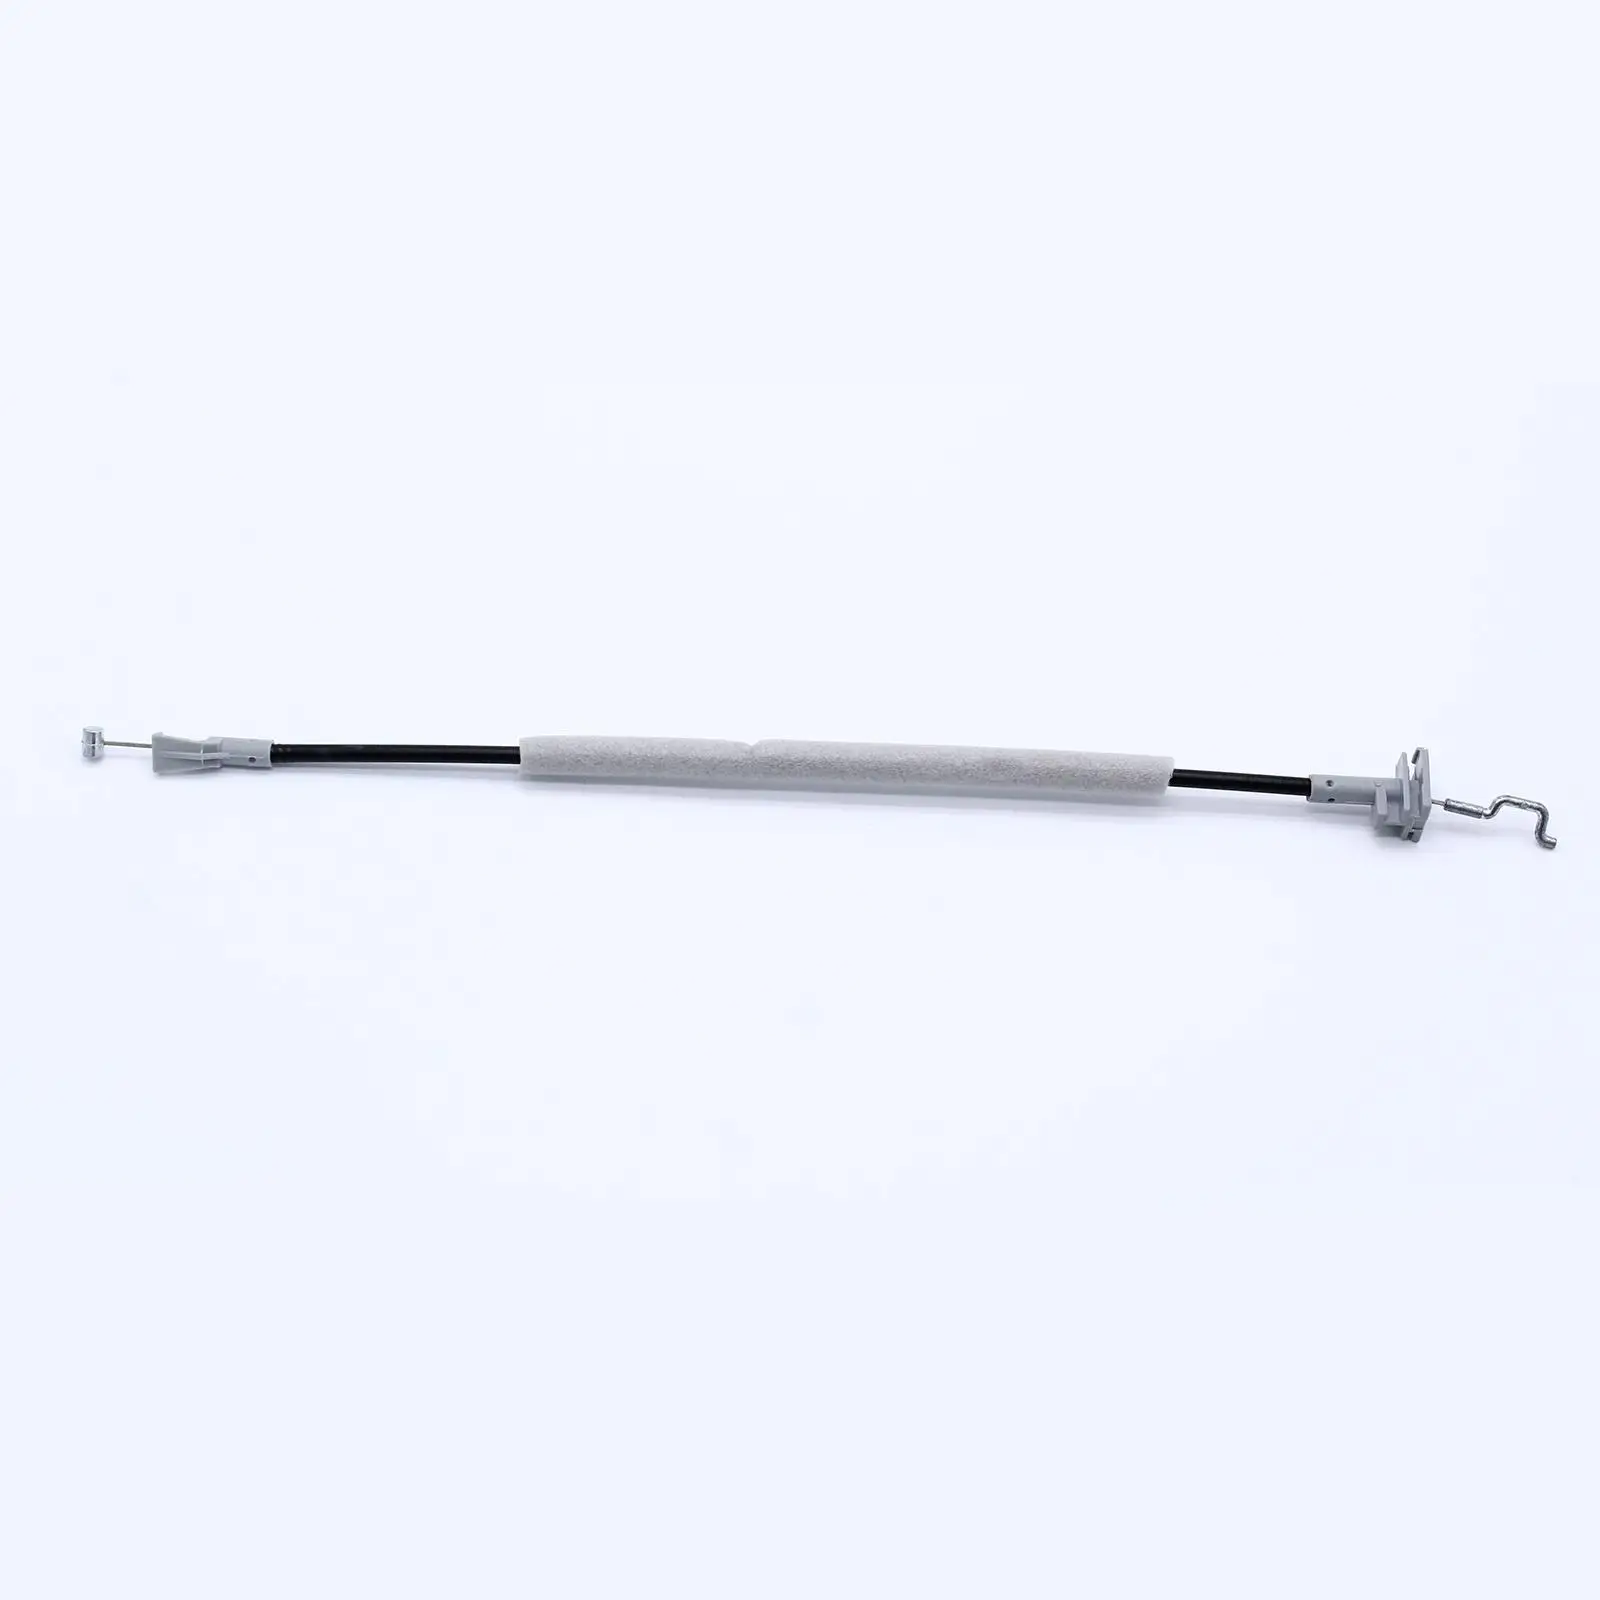 Car Door Locking Release Rod Cable for Vauxhall Signum 2003-2008 137822